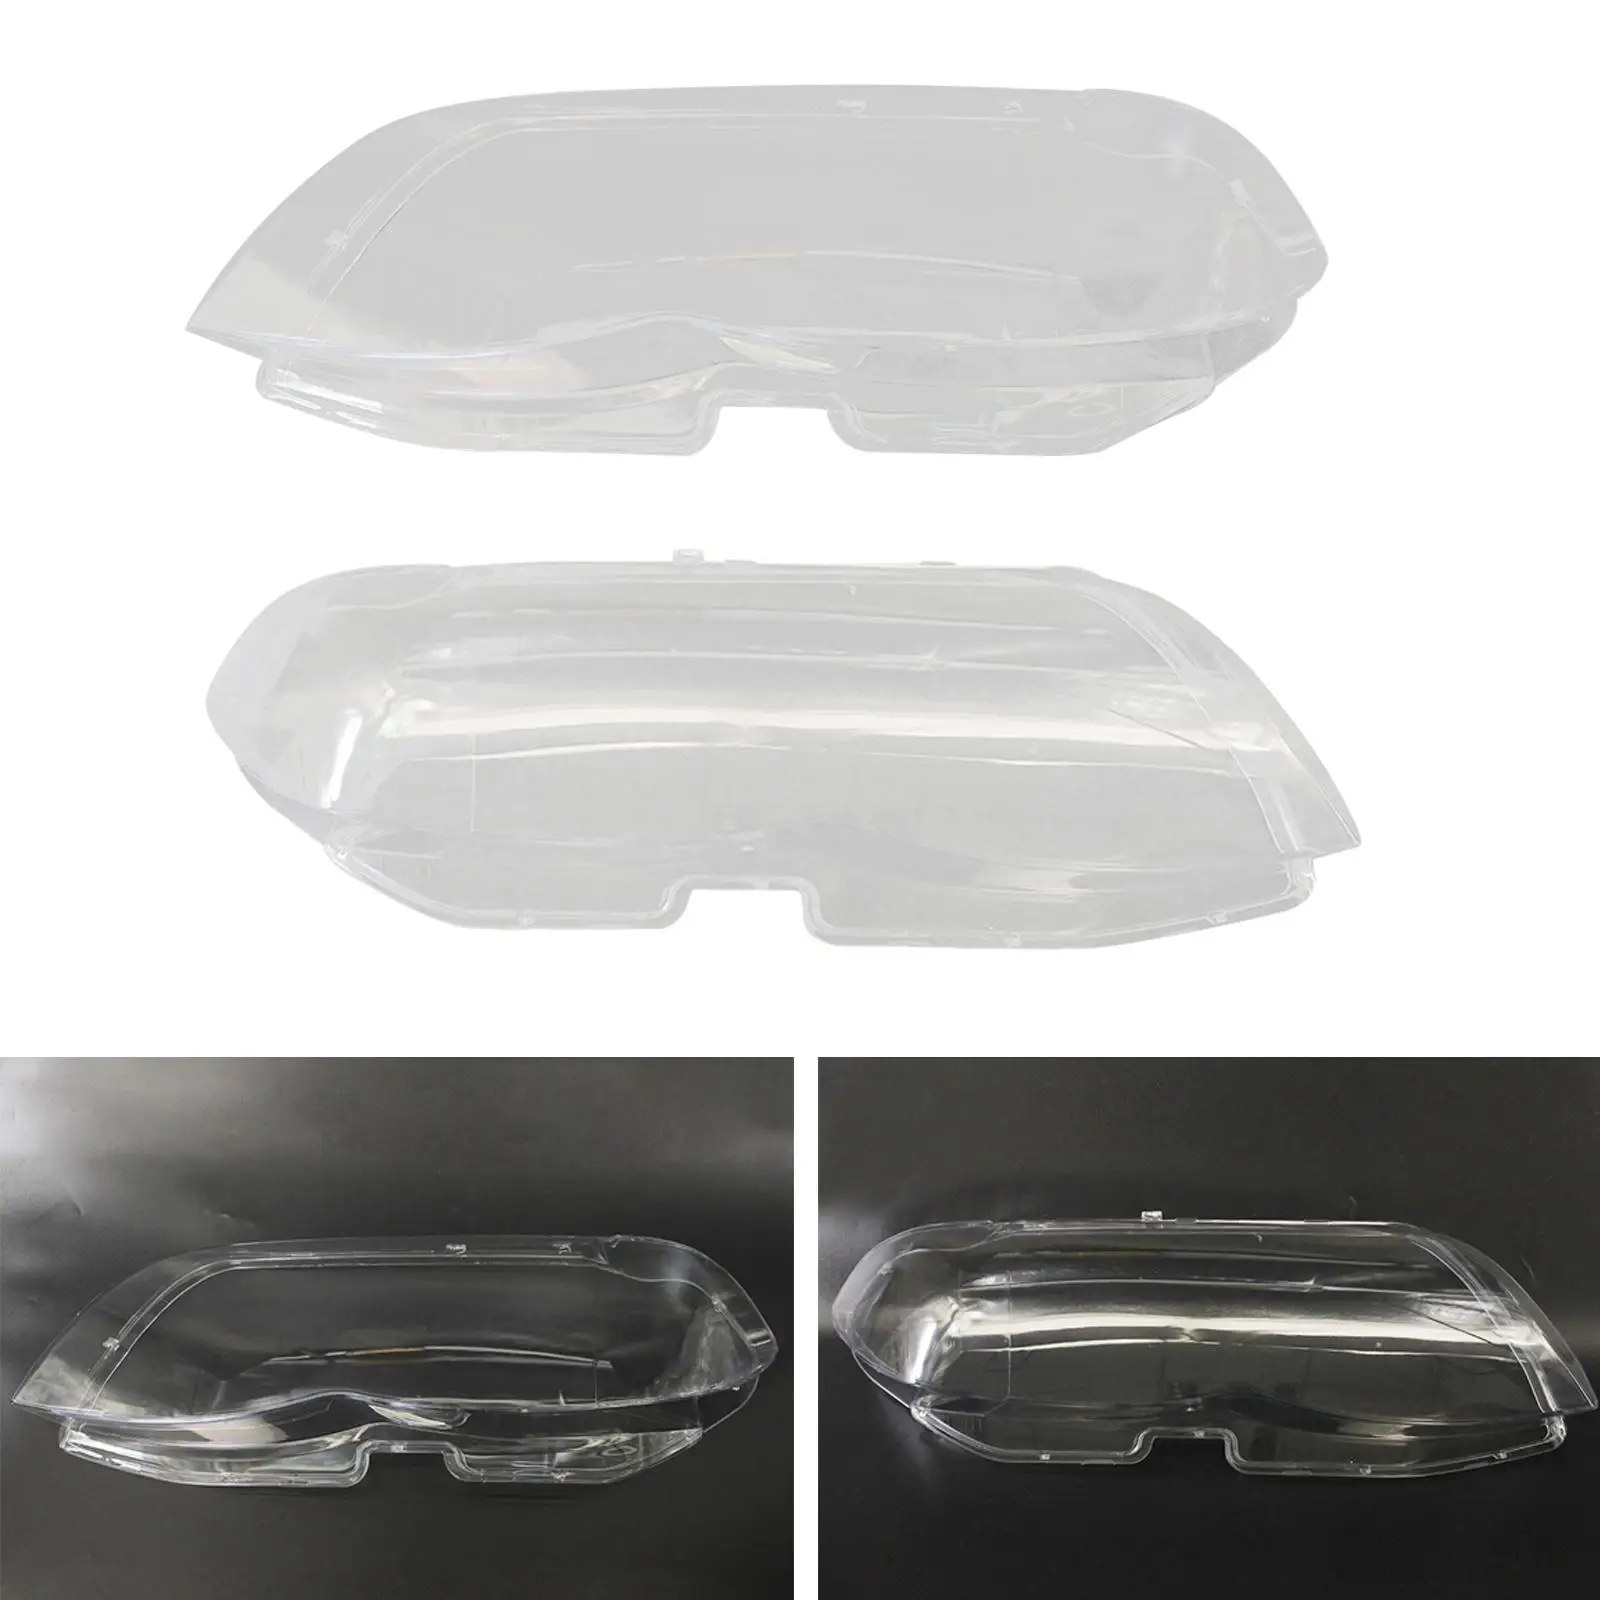 Car Front Headlight Lens Cover Replacements for BMW X5 E53 3.0 4.4 2004-2006